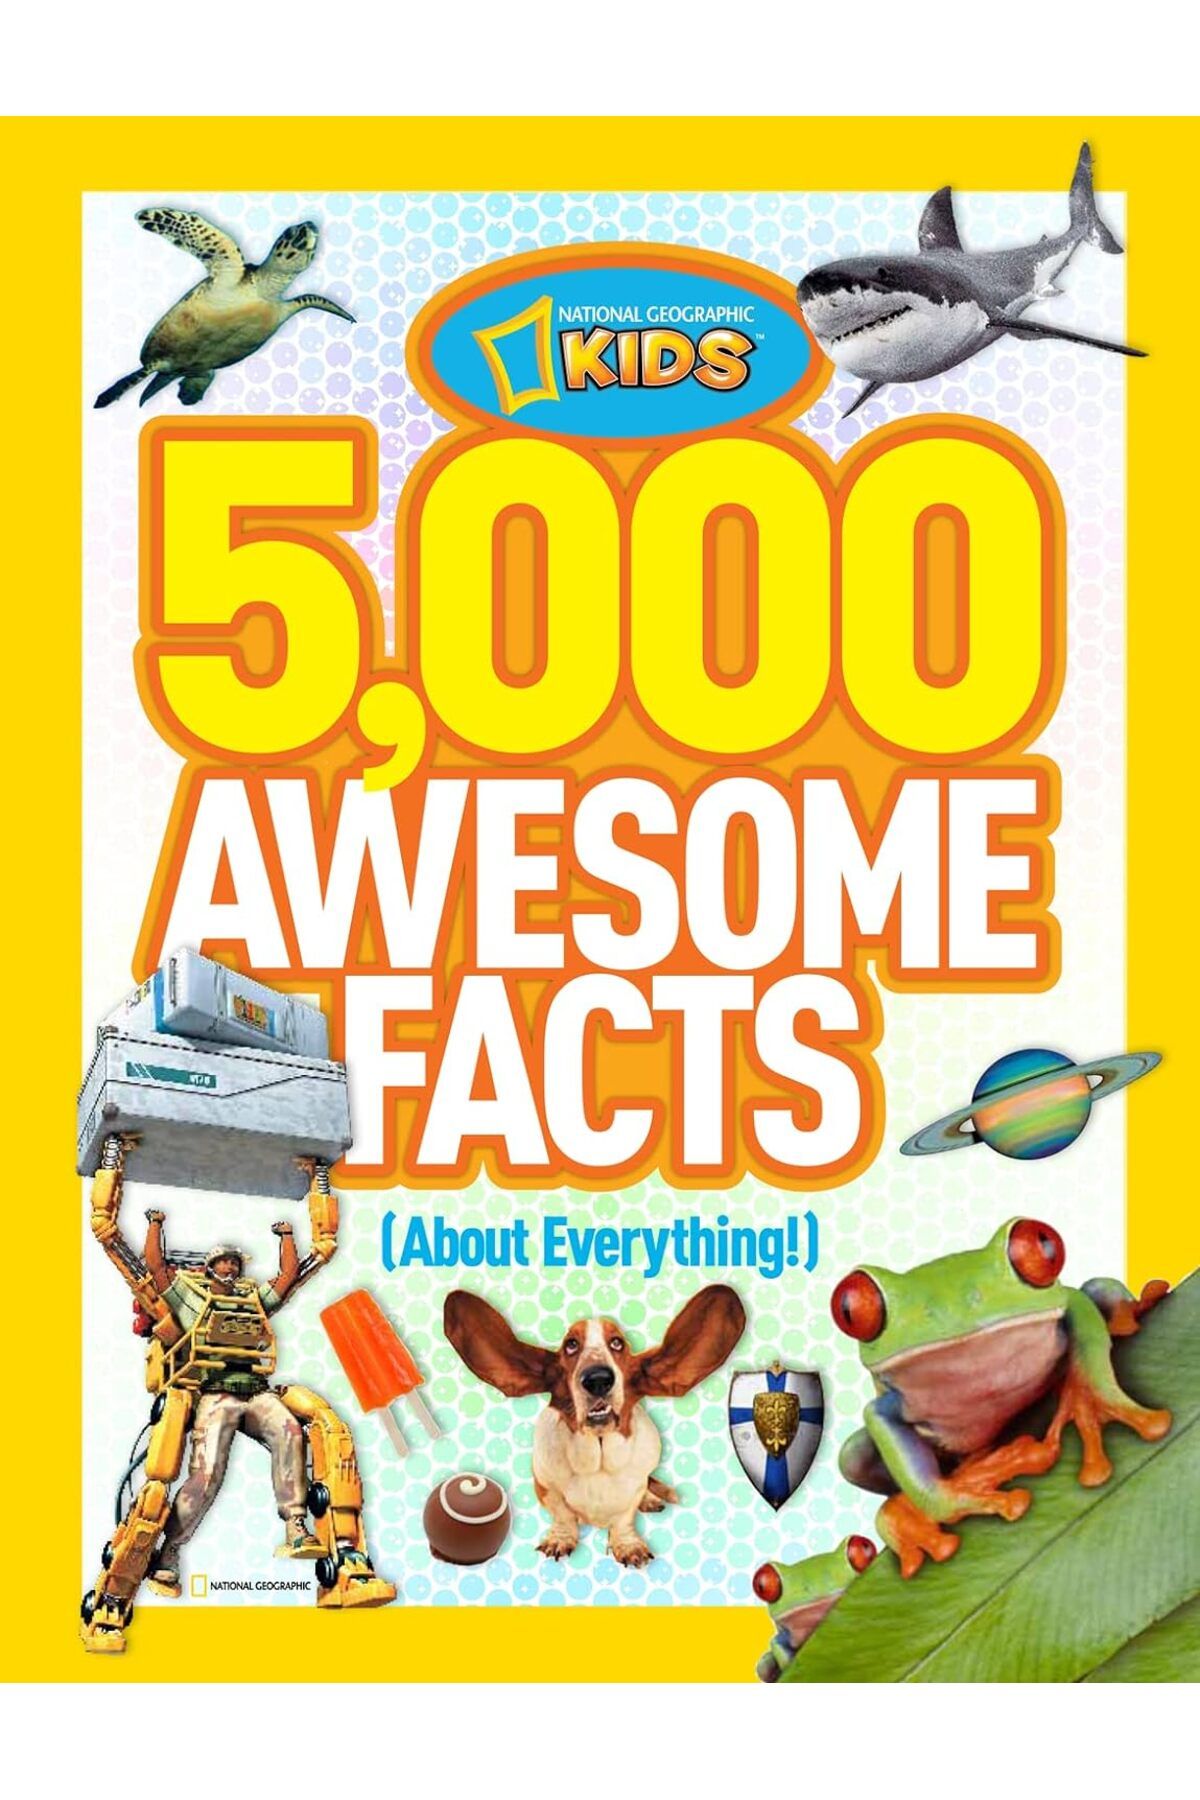 National Geographic Kids 5,000 Awesome Facts (About Everything!) - National Geographic